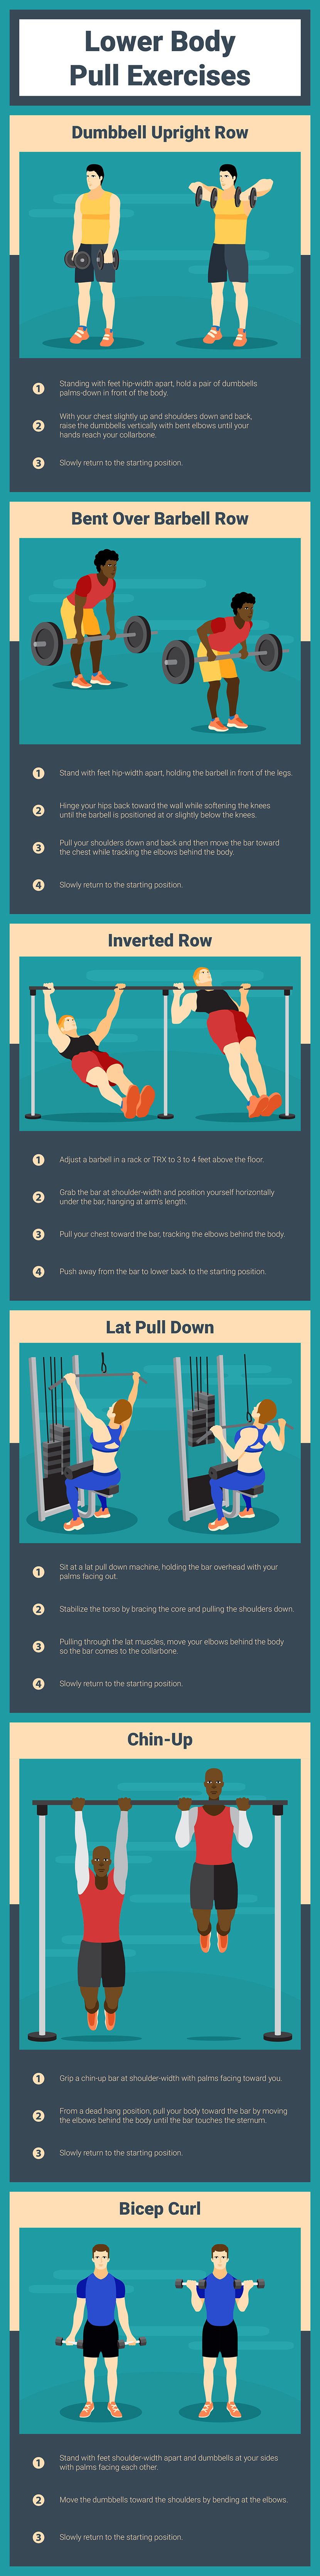 The Importance of Pulling Exercises - Lower Body Pull Exercises